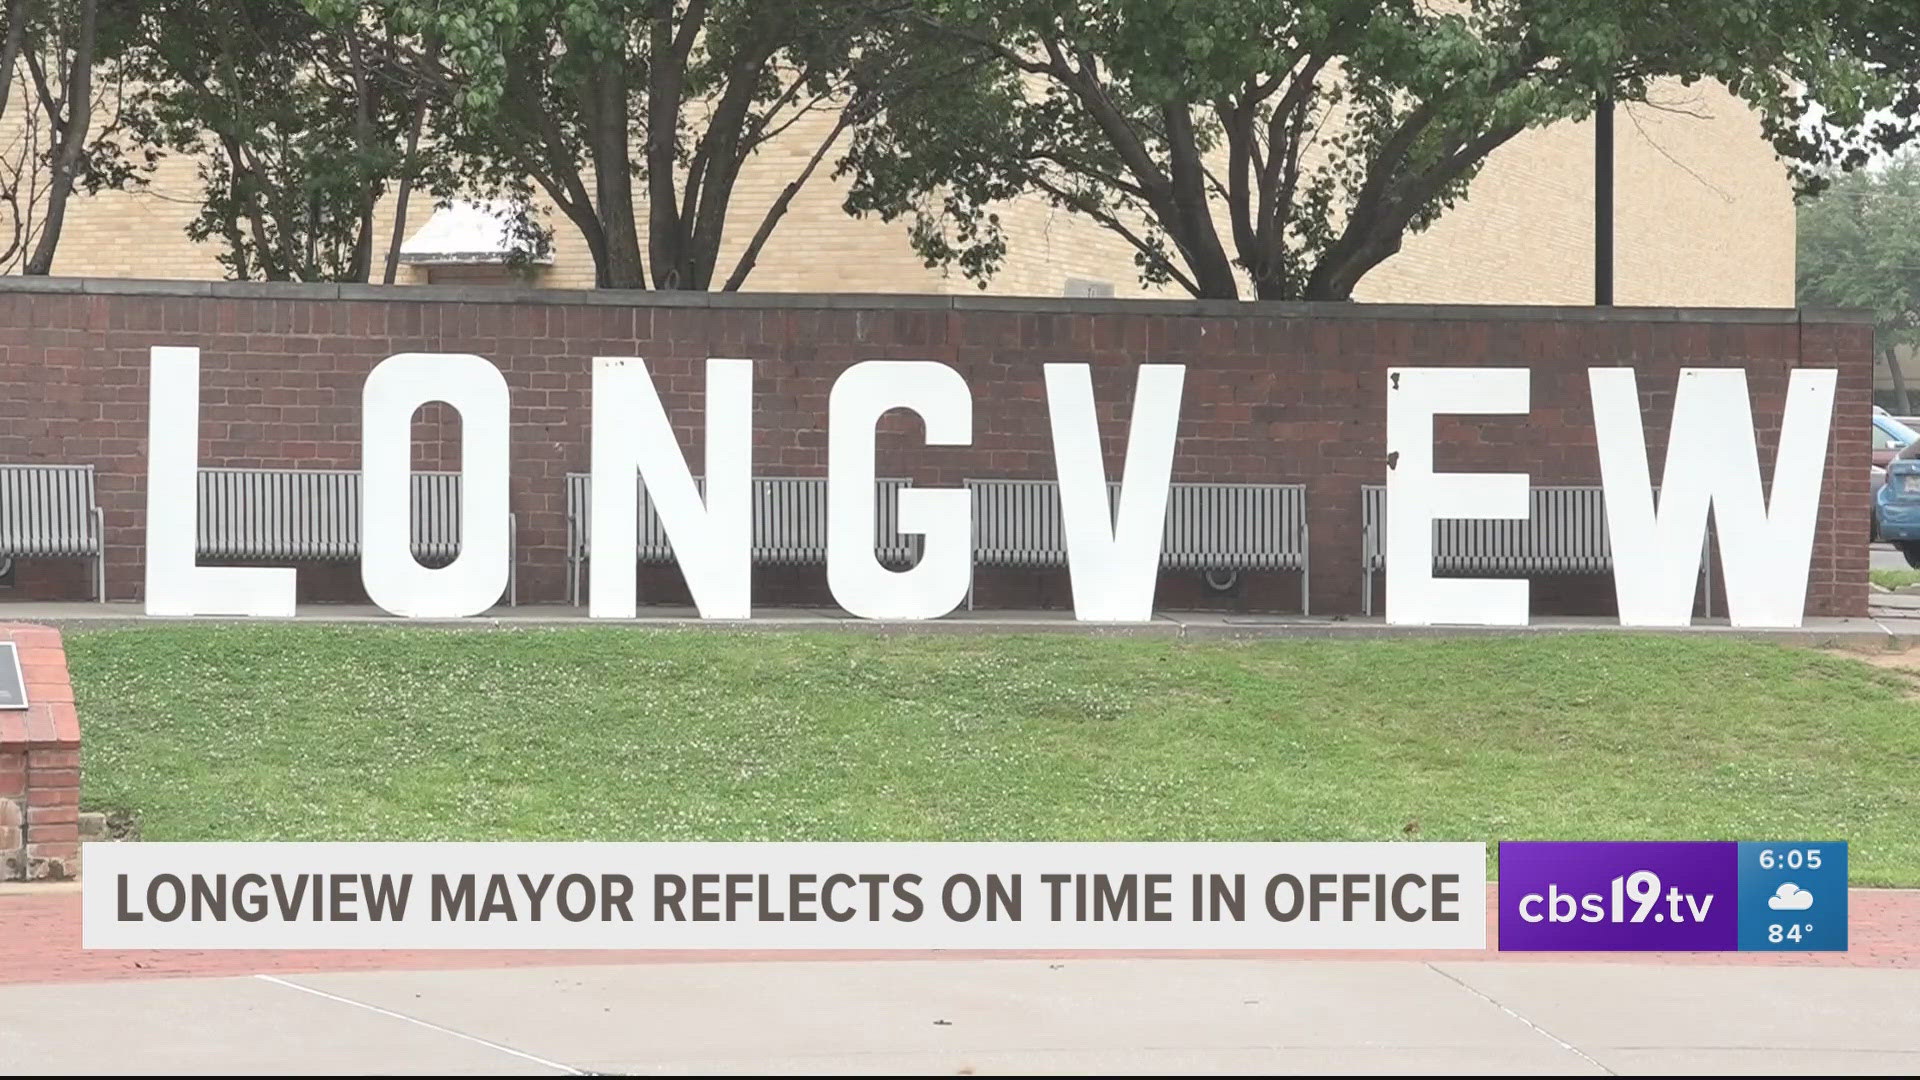 Despite his almost 20 years as a public servant, Mack said he was never really interested in politics. Instead, his interest is with the city and people of Longview.